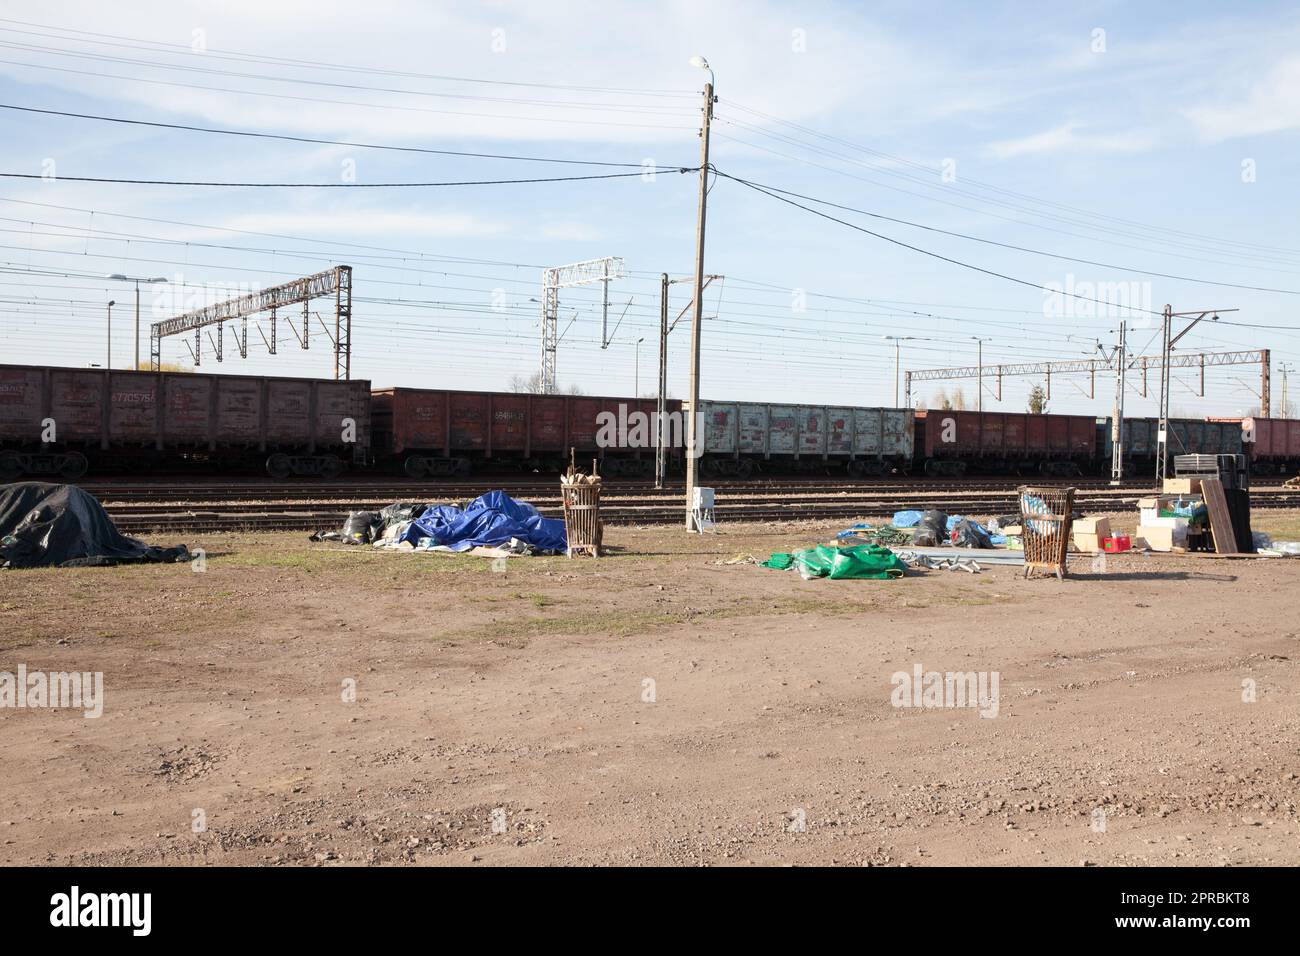 Aid tents lay collapsed at a train yard, Medyka Poland April 2022 Stock Photo